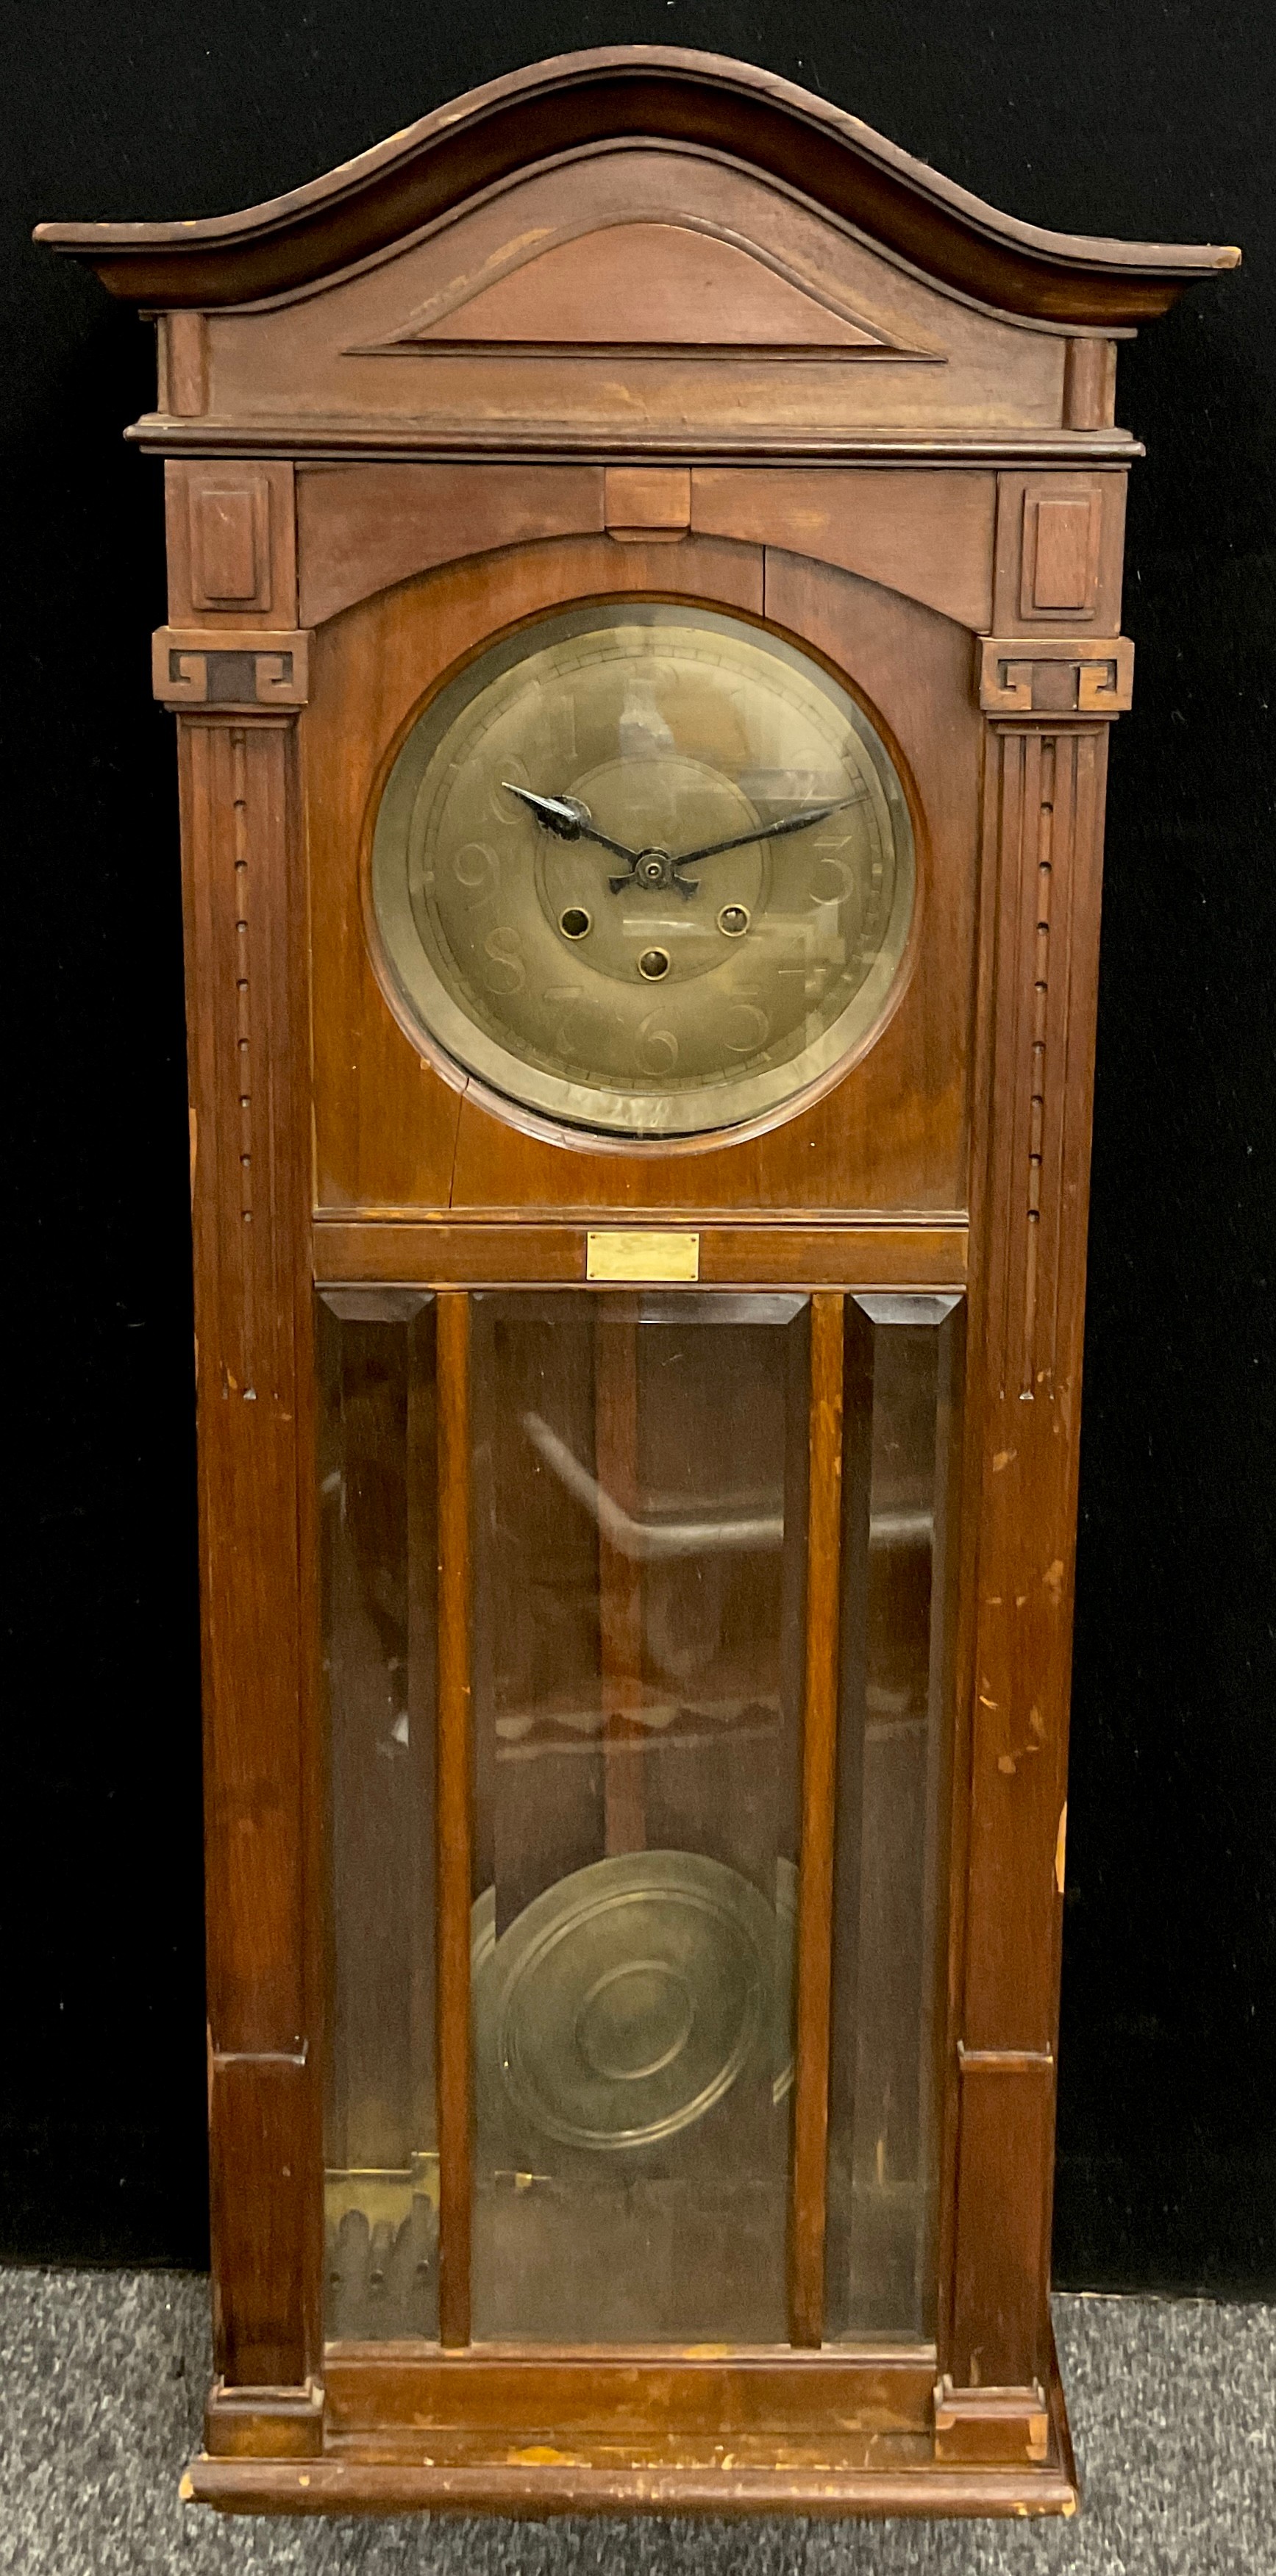 A Gustav Becker type spring-wound wall clock, in the Arts-and Crafts style, walnut case, brass